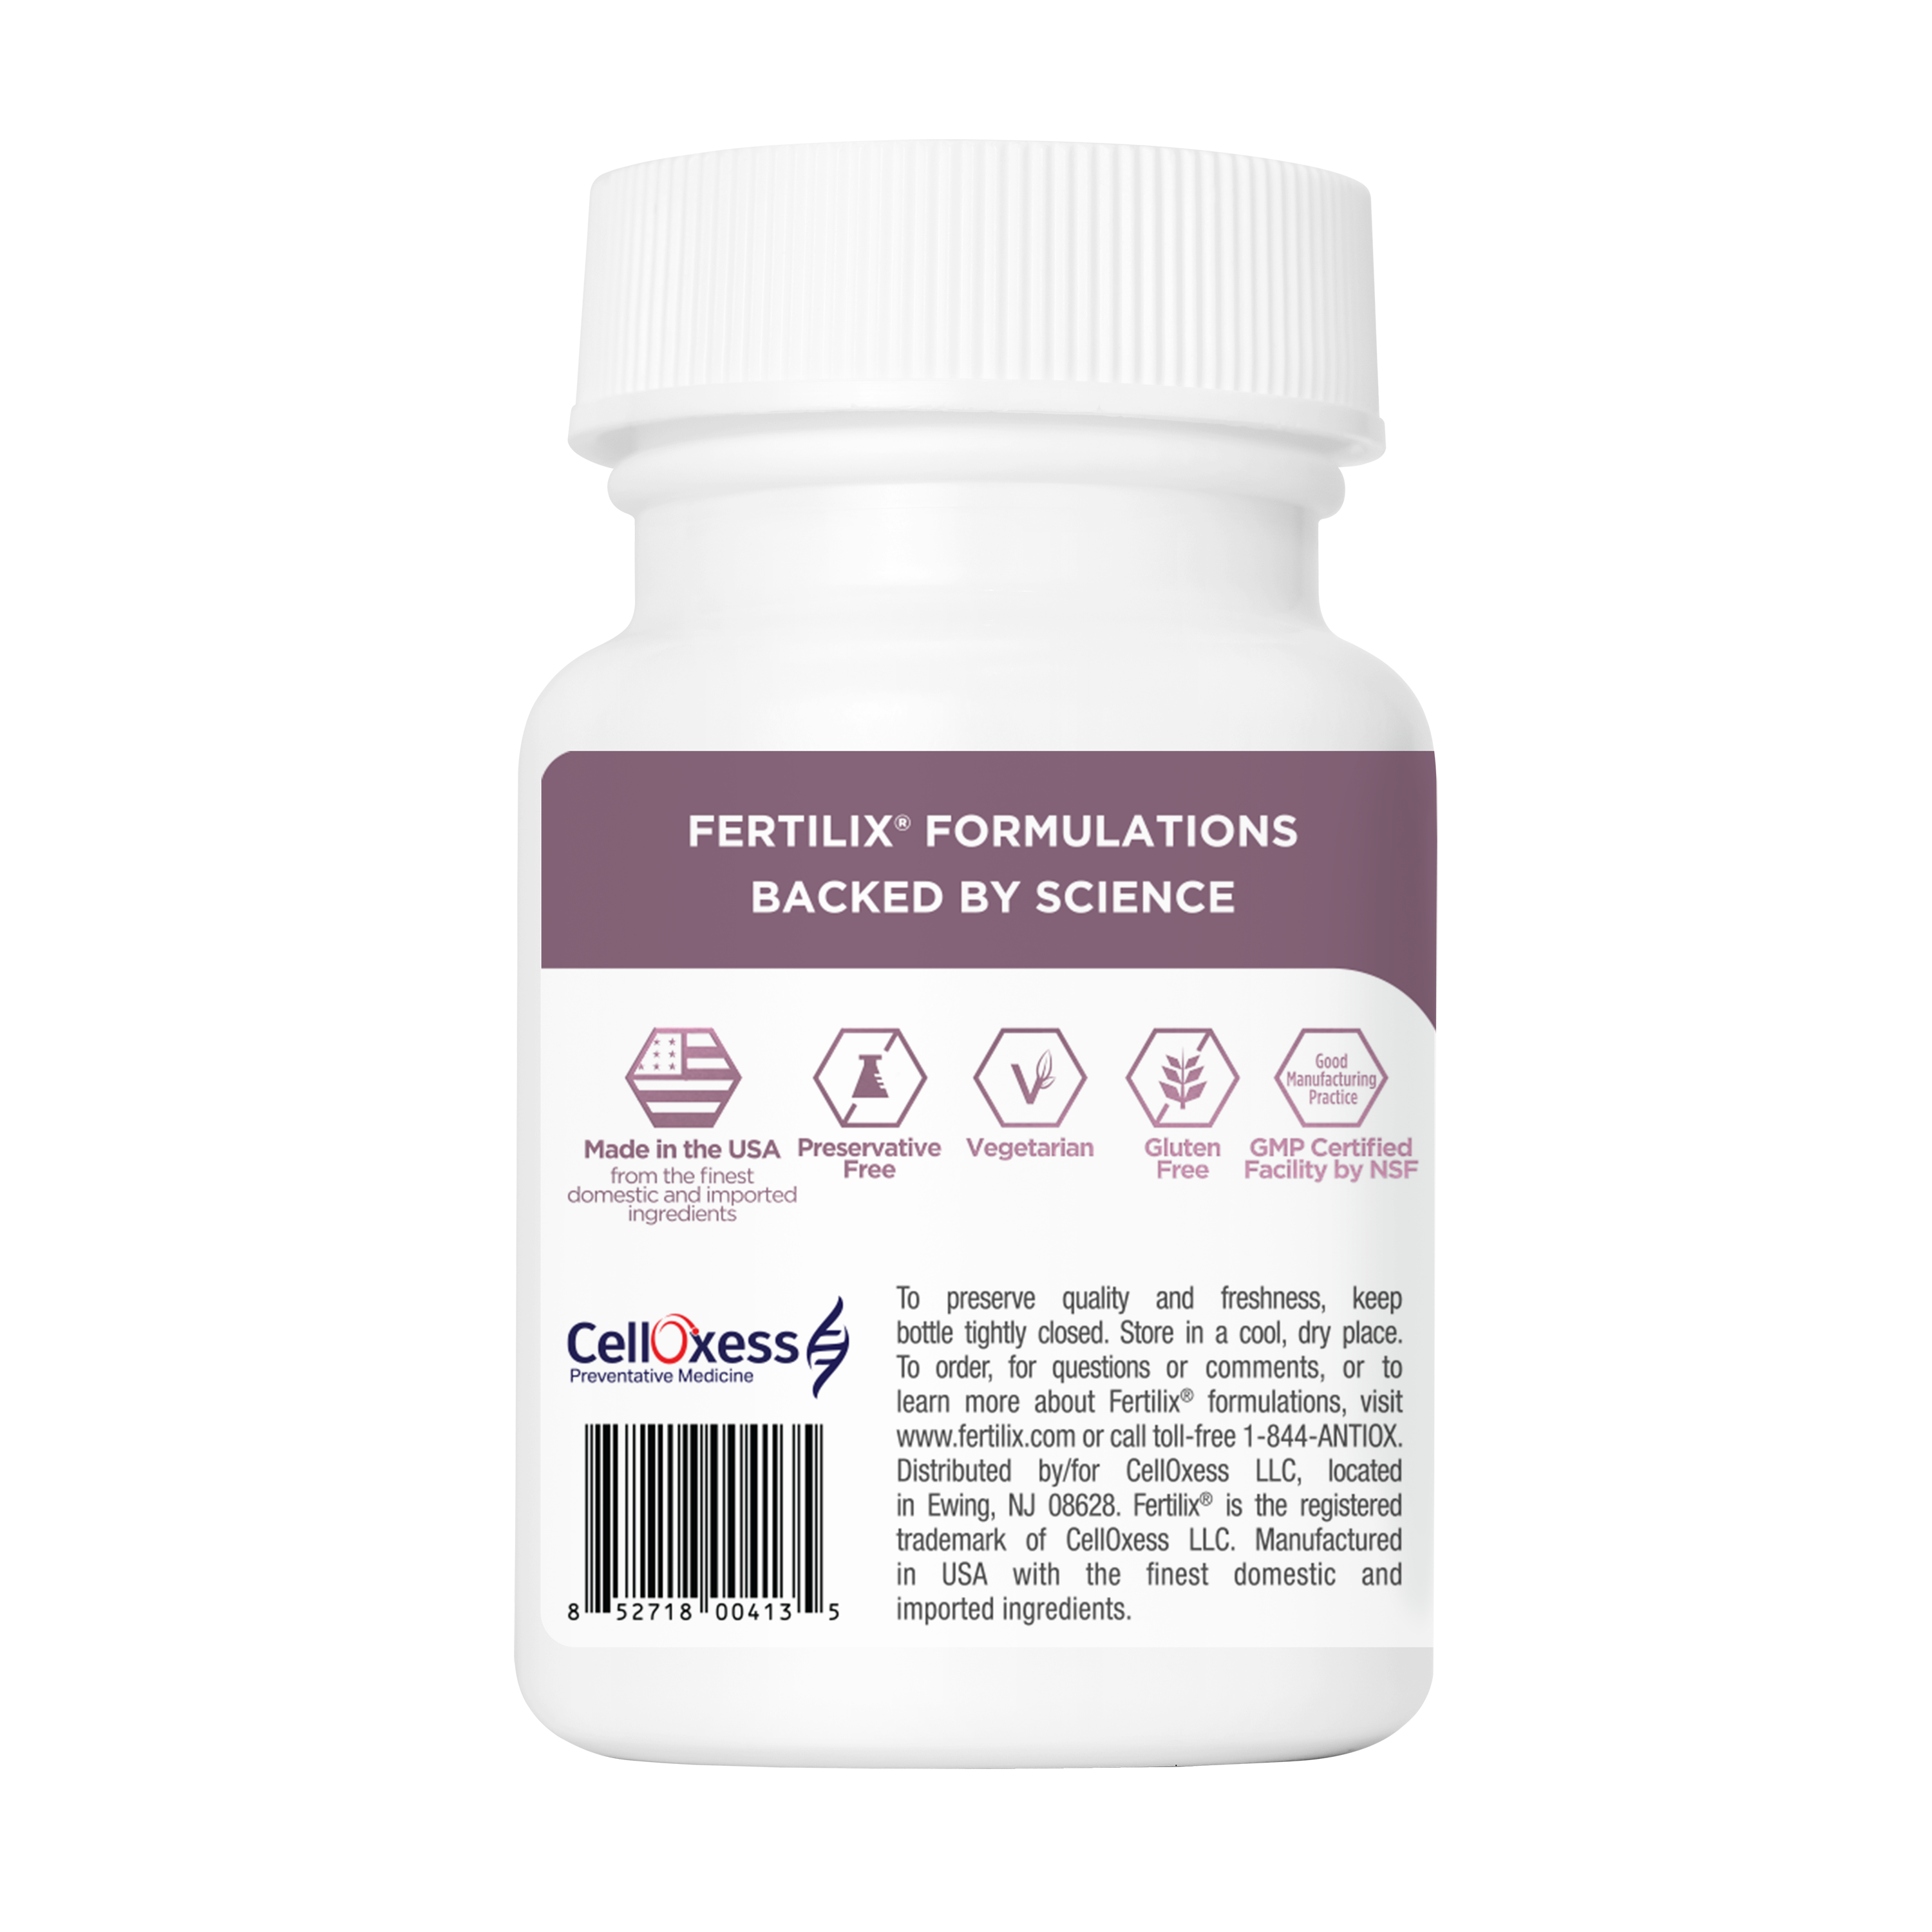 Bottle of DHEA in vegetarian capsules to help support optimum hormone levels for female reproductive health